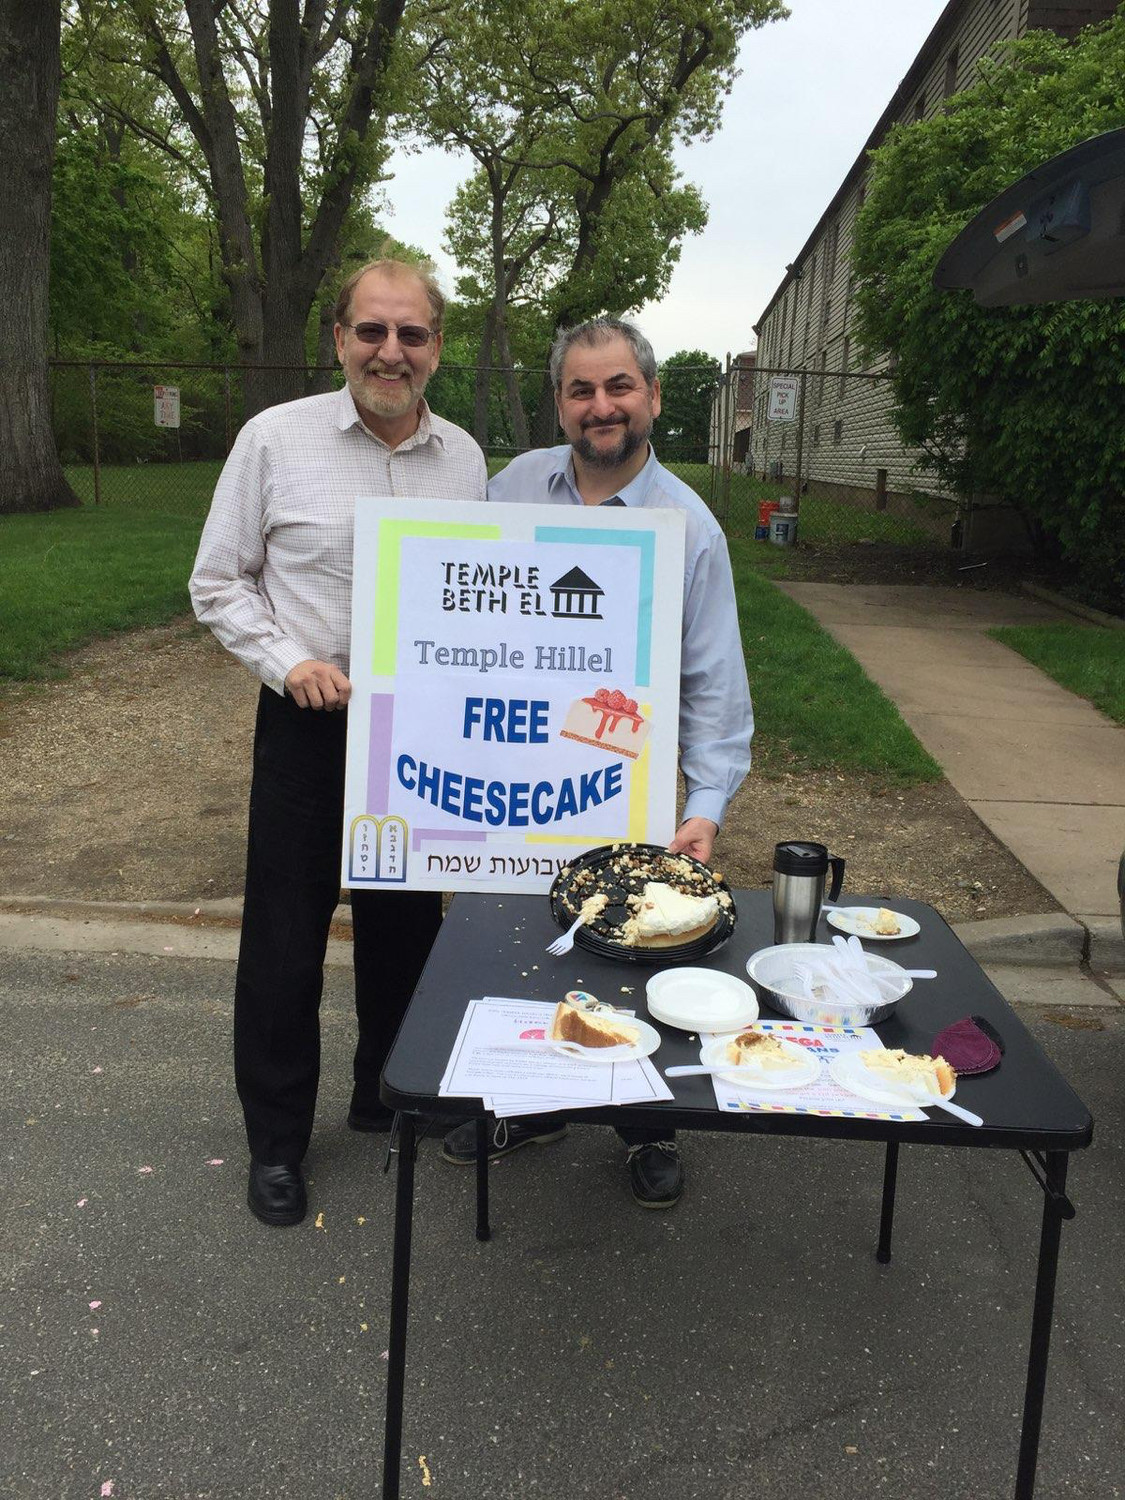 Temple Hillel spiritual leader Rabbi Steven Graber, left, and Rabbi Claudio Kupchik of Temple Beth-El, served cheese cake and spoke to Hewlett High students about the Jewish holiday of Shavuot.